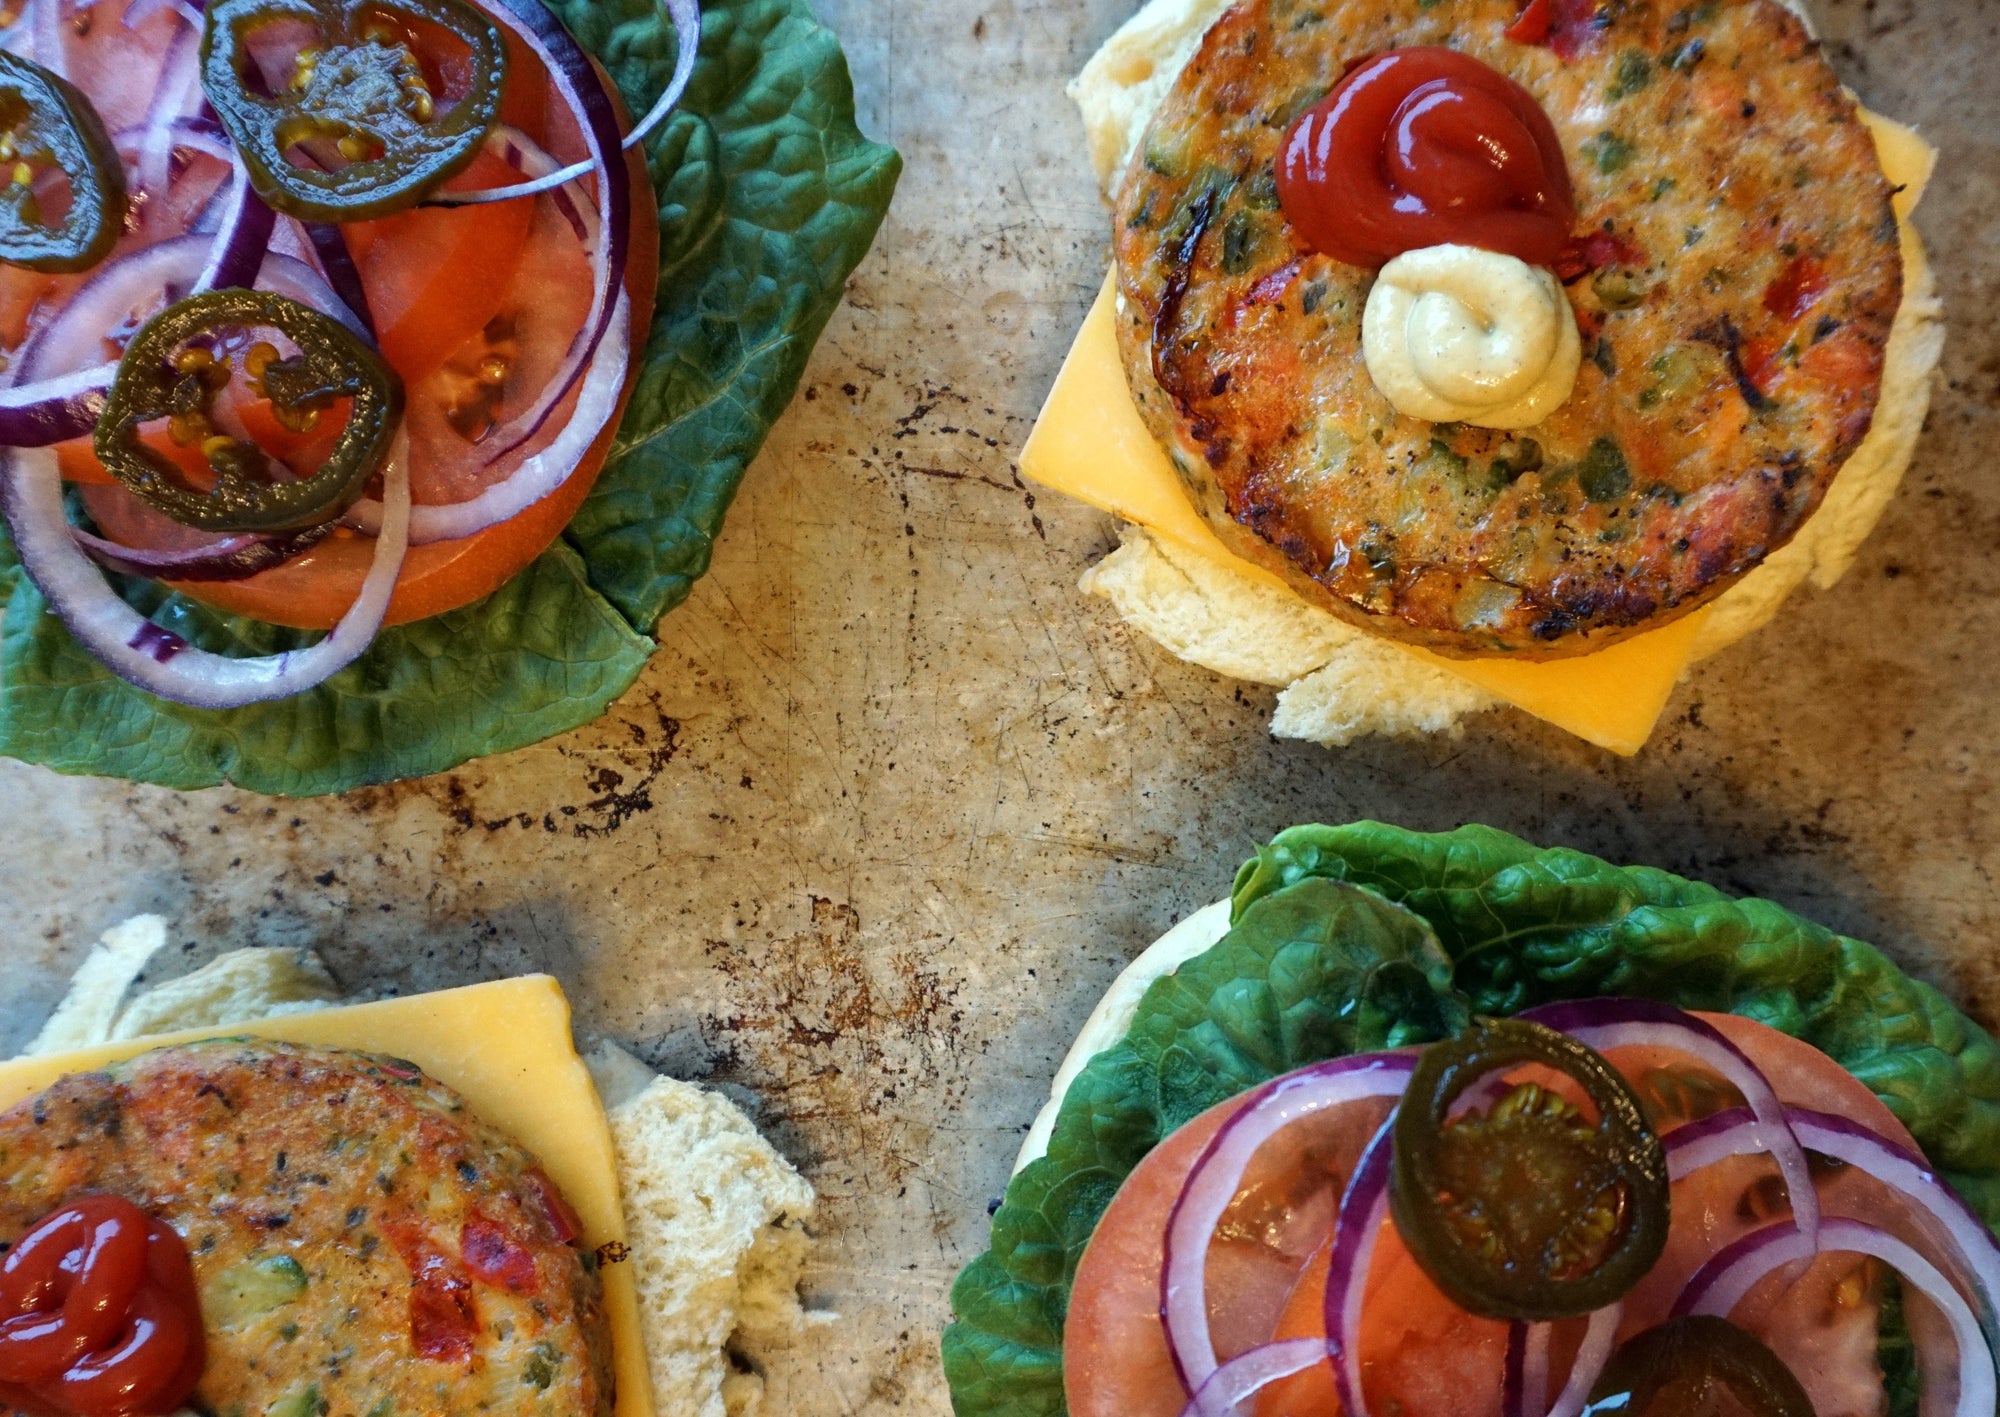 Salmon burgers made with wild caught copper river salmon